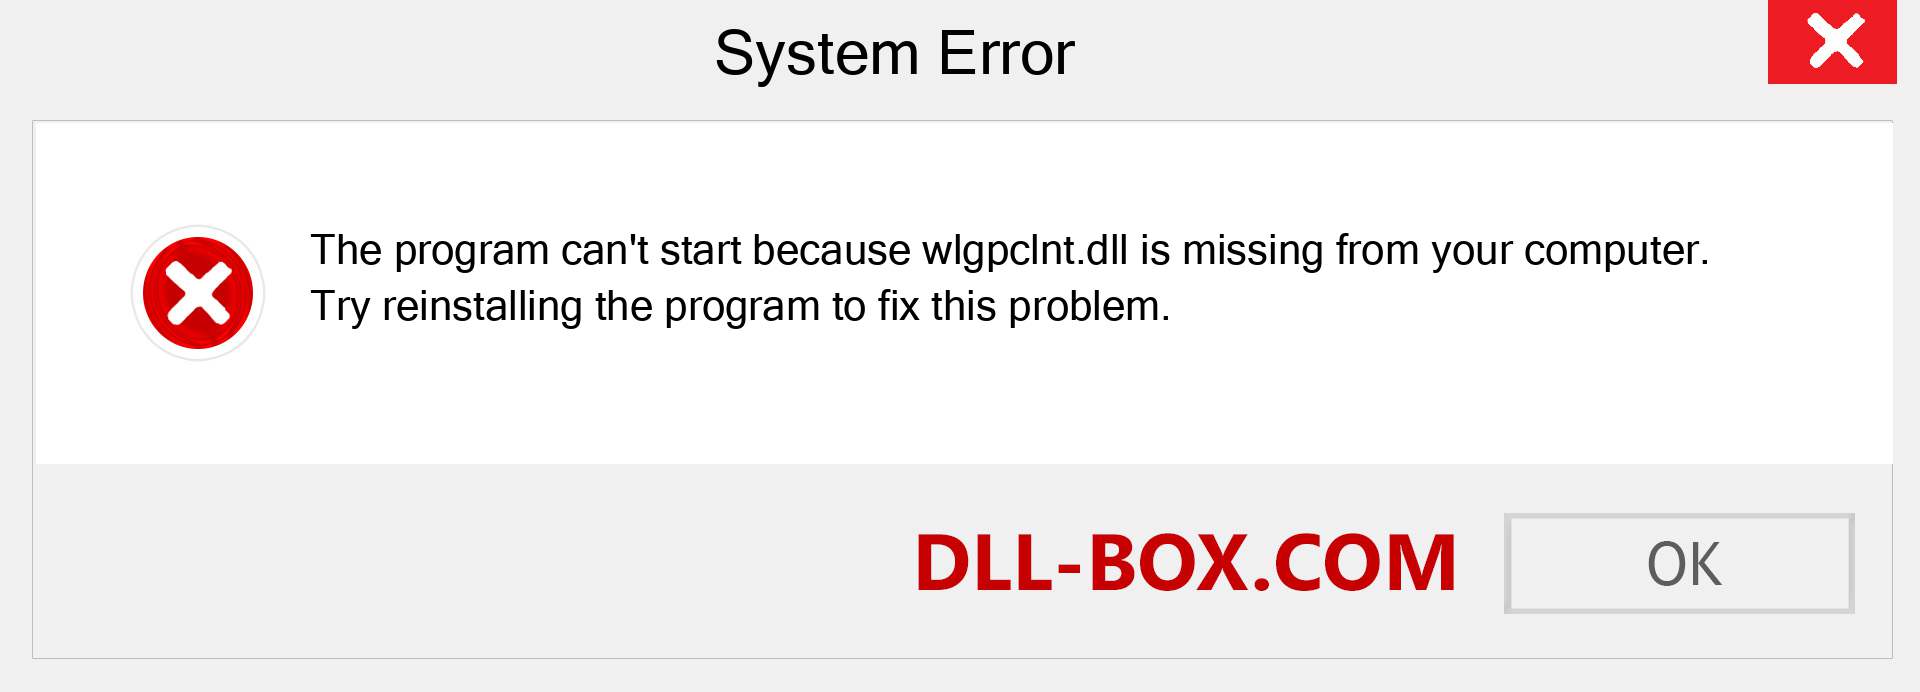  wlgpclnt.dll file is missing?. Download for Windows 7, 8, 10 - Fix  wlgpclnt dll Missing Error on Windows, photos, images